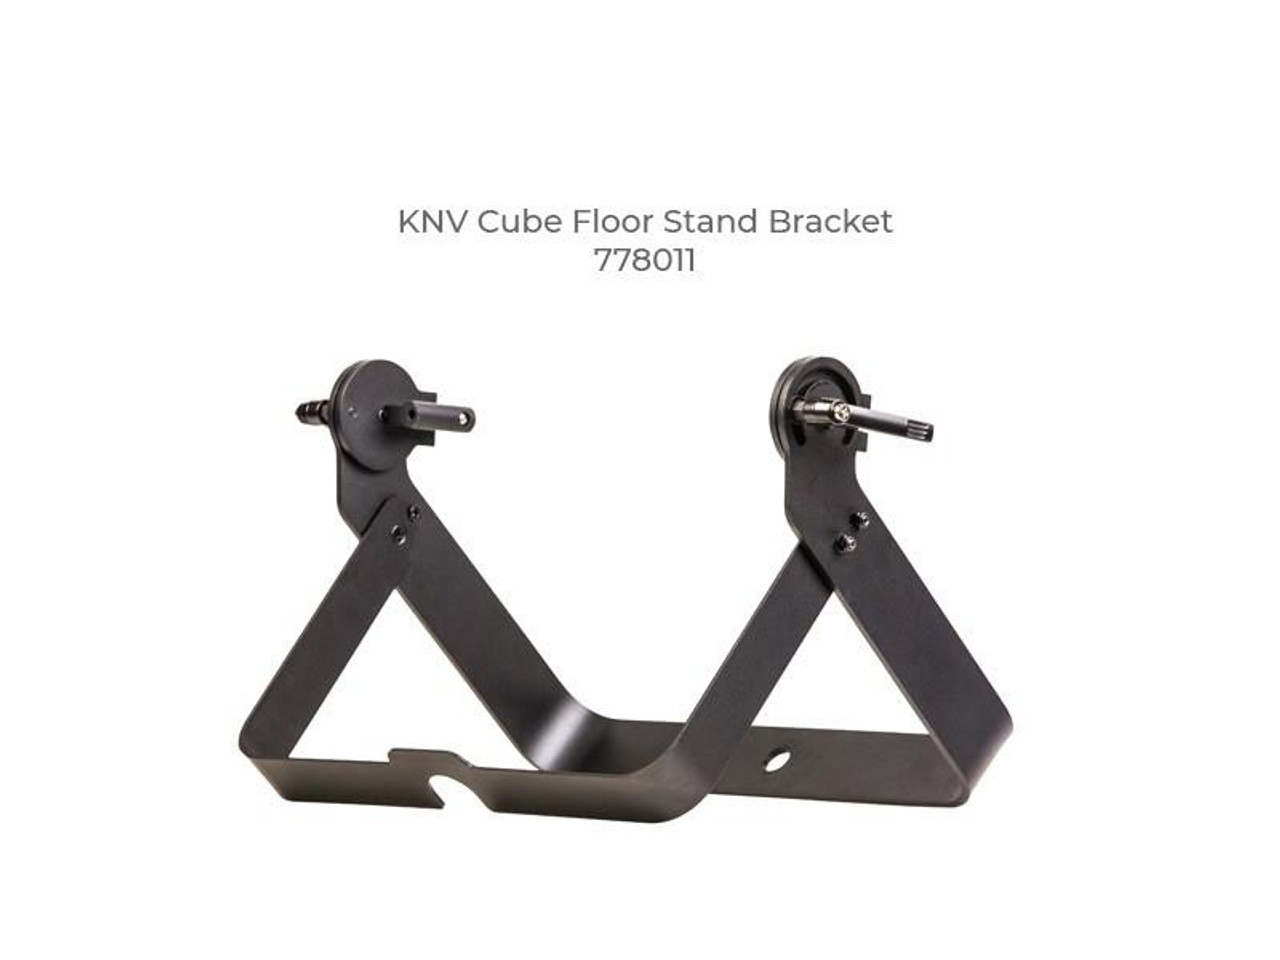 German Light Products 778011 KNV Cube Floor Stand Bracket (778011)